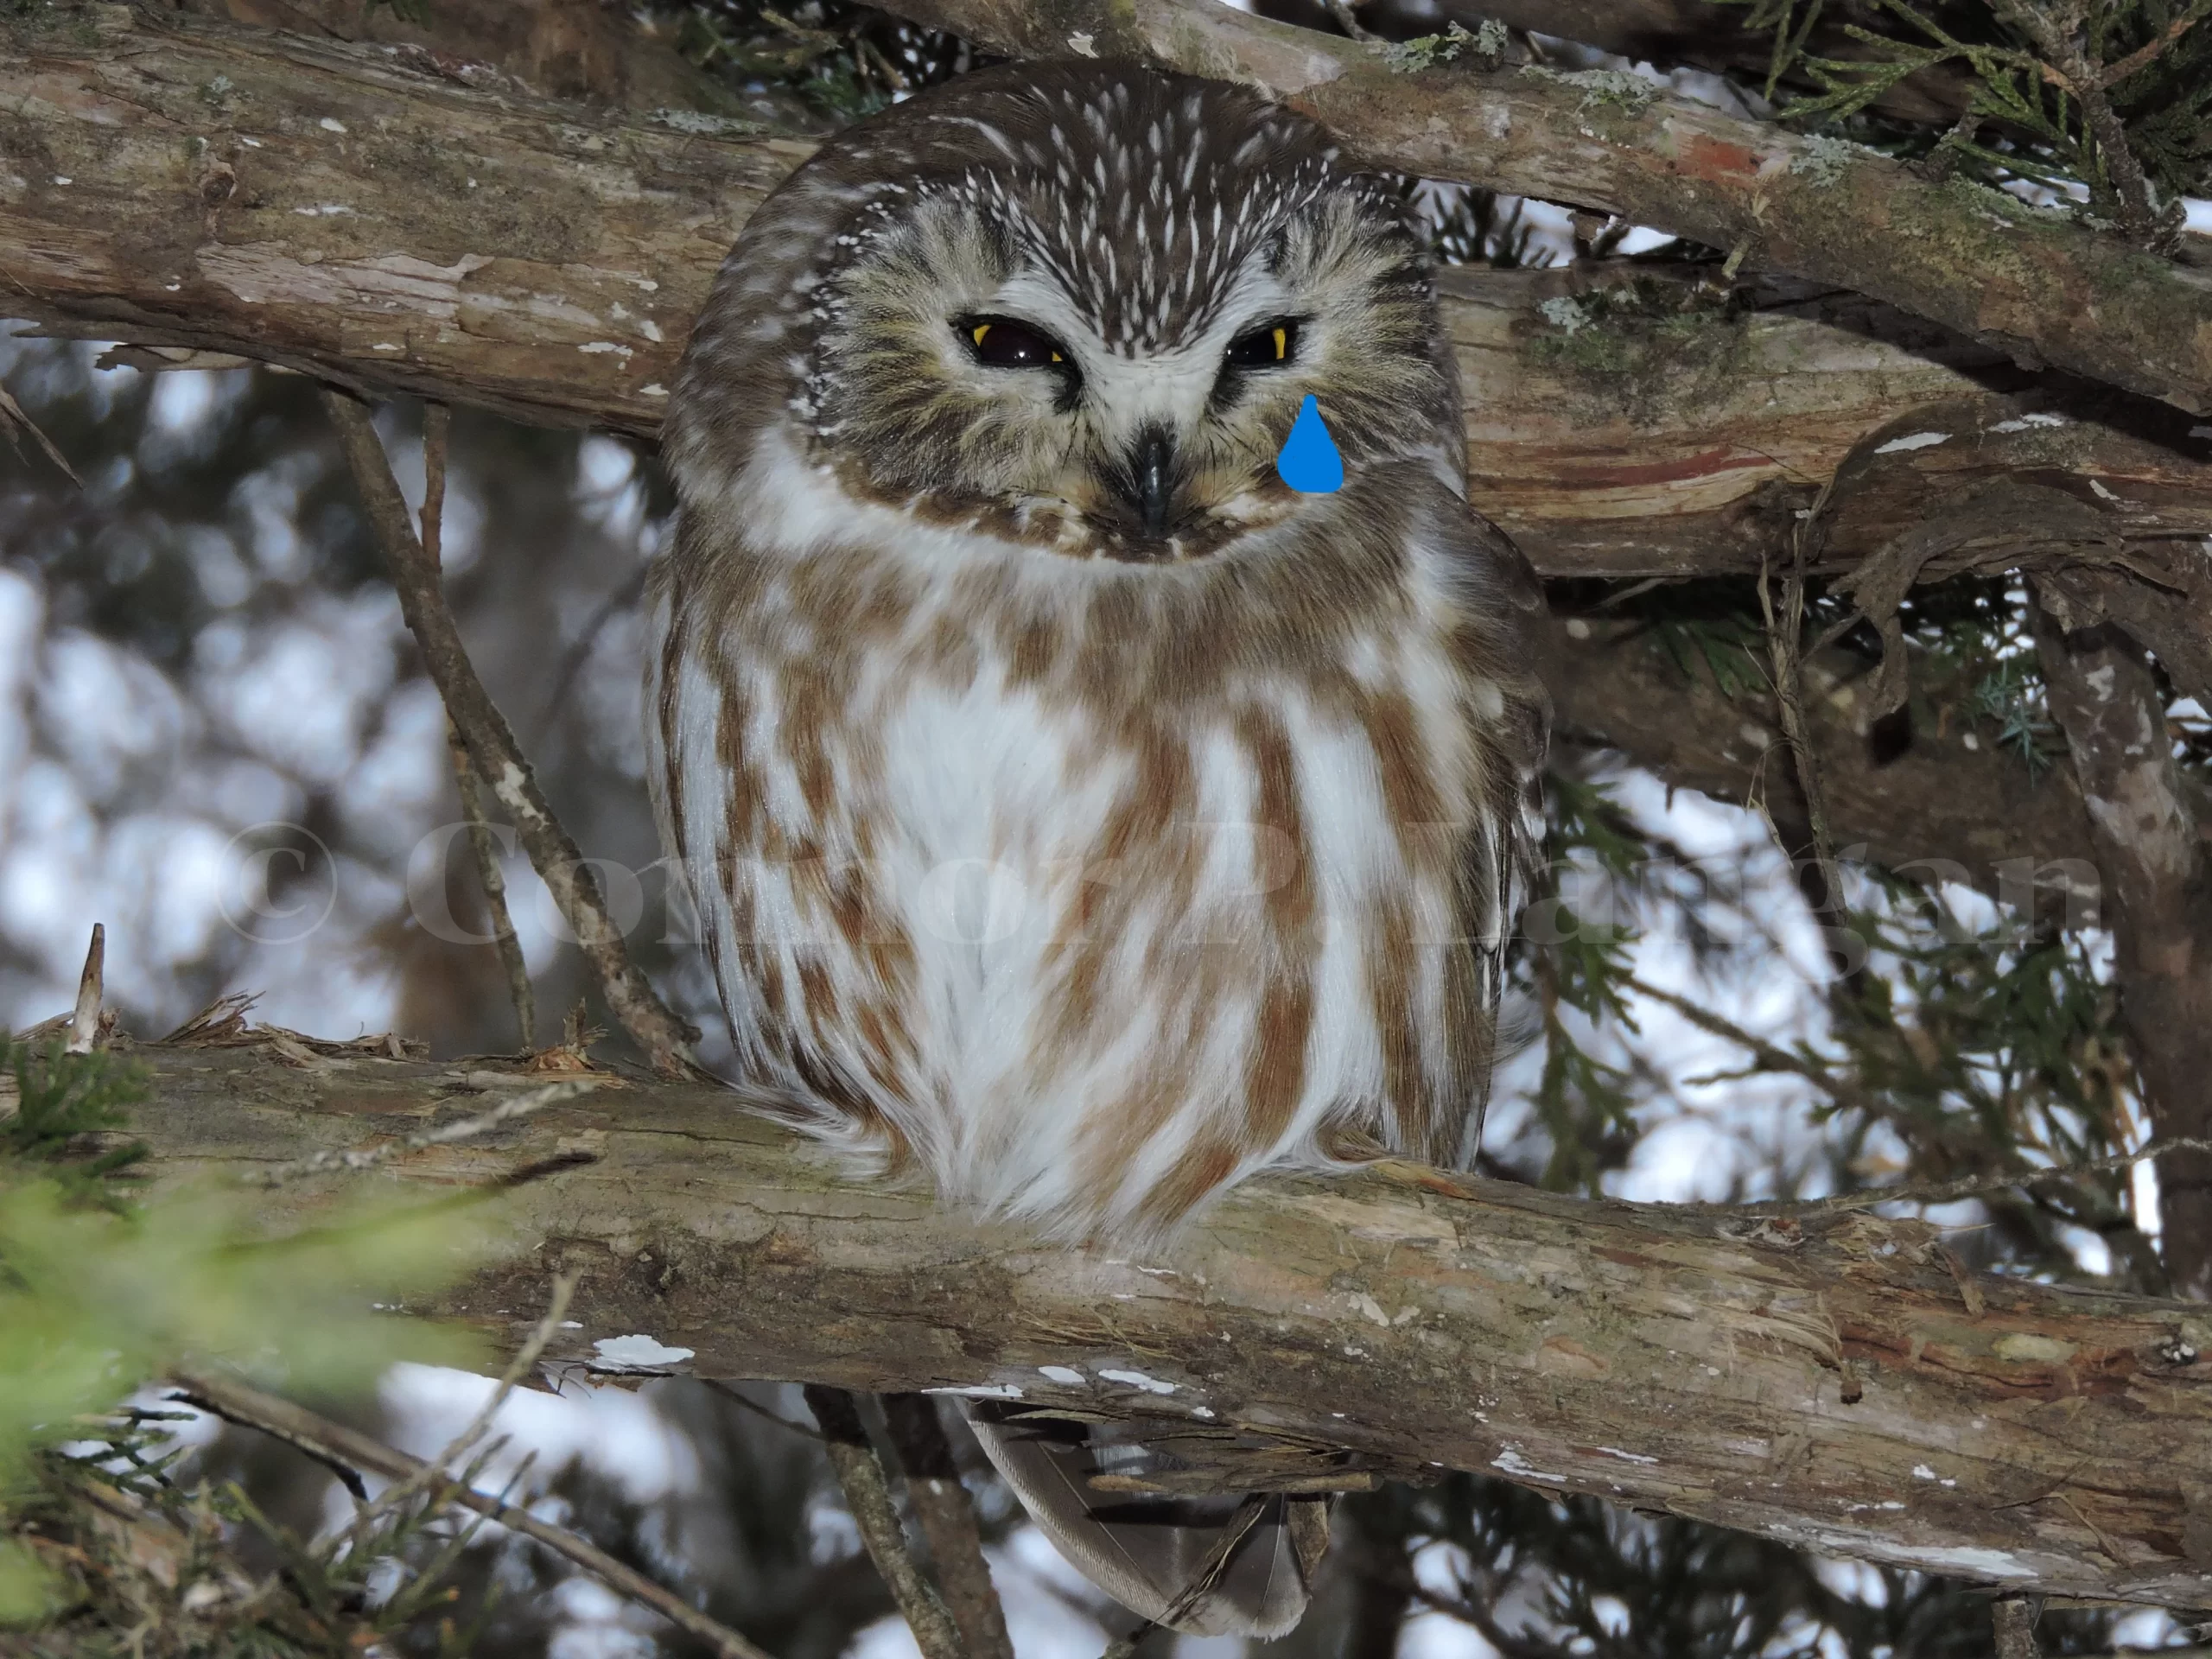 Do birds cry? Here, a Northern Saw-whet Owl appears to be shedding a tear from its roost.